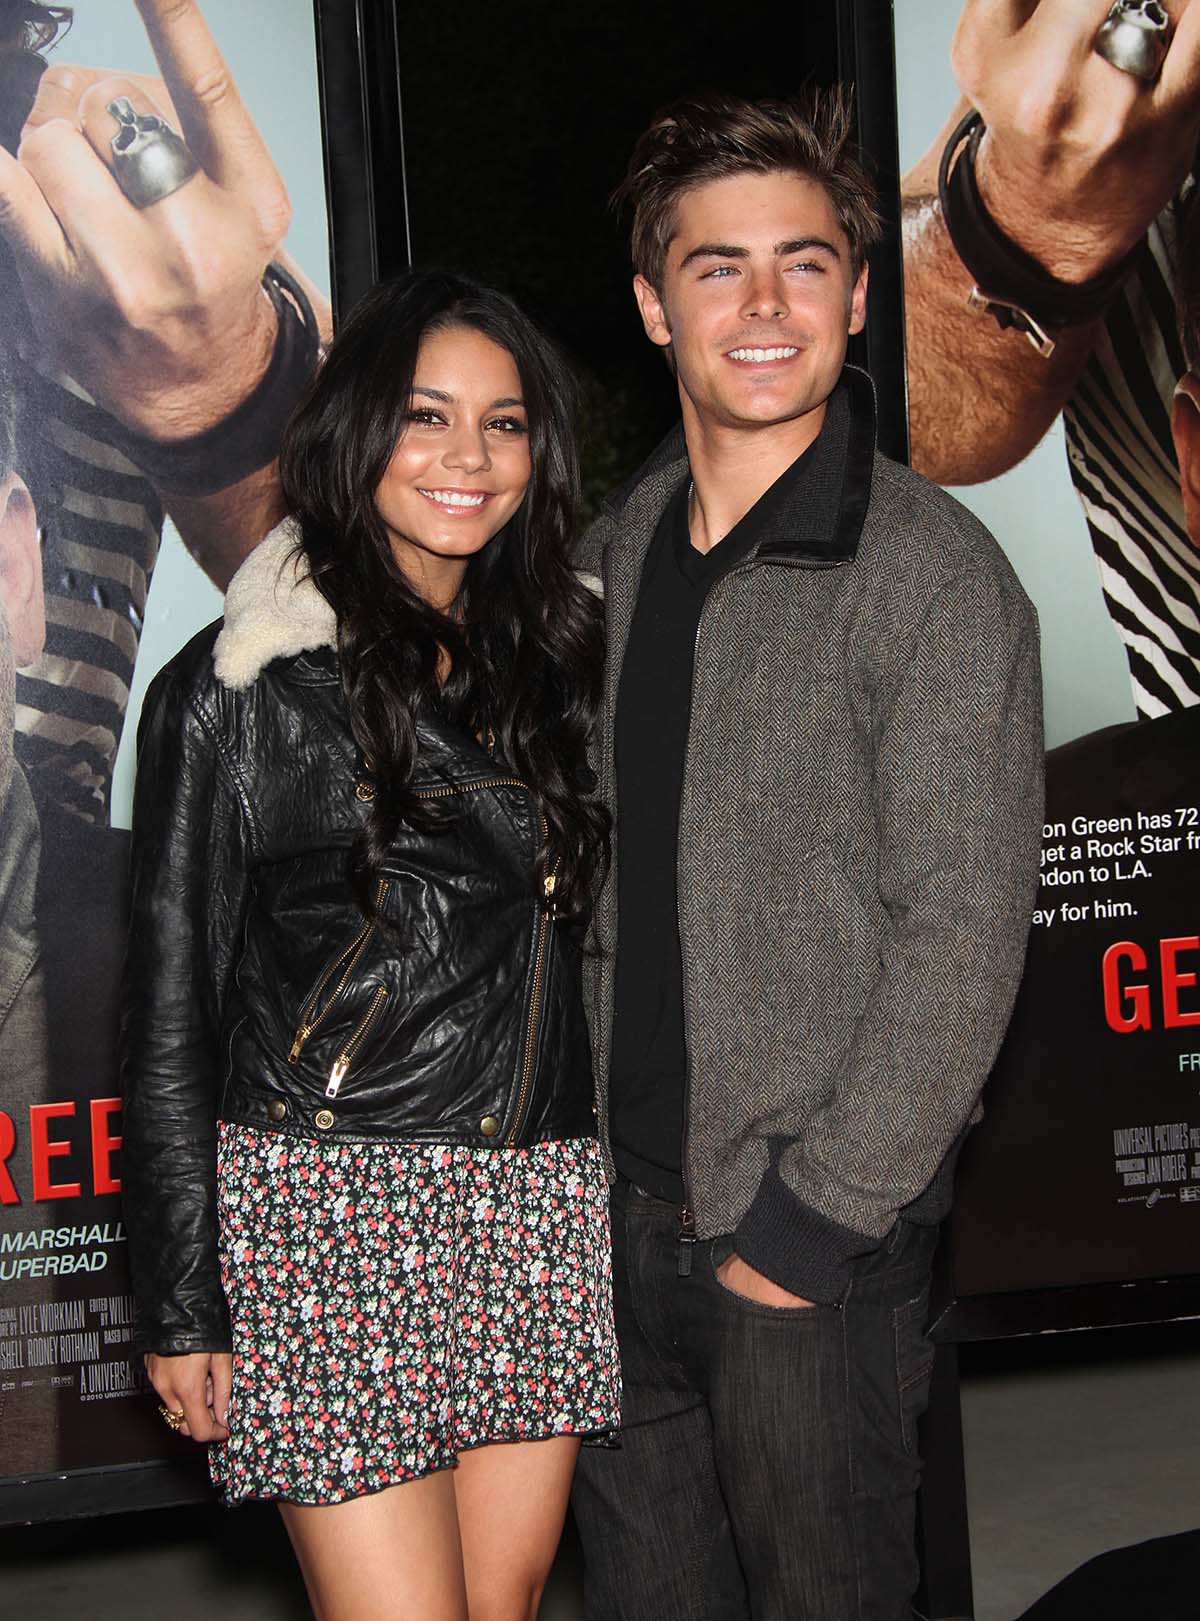 Zac Efron And Vanessa Hudgens A Timeline Of Their Relationship